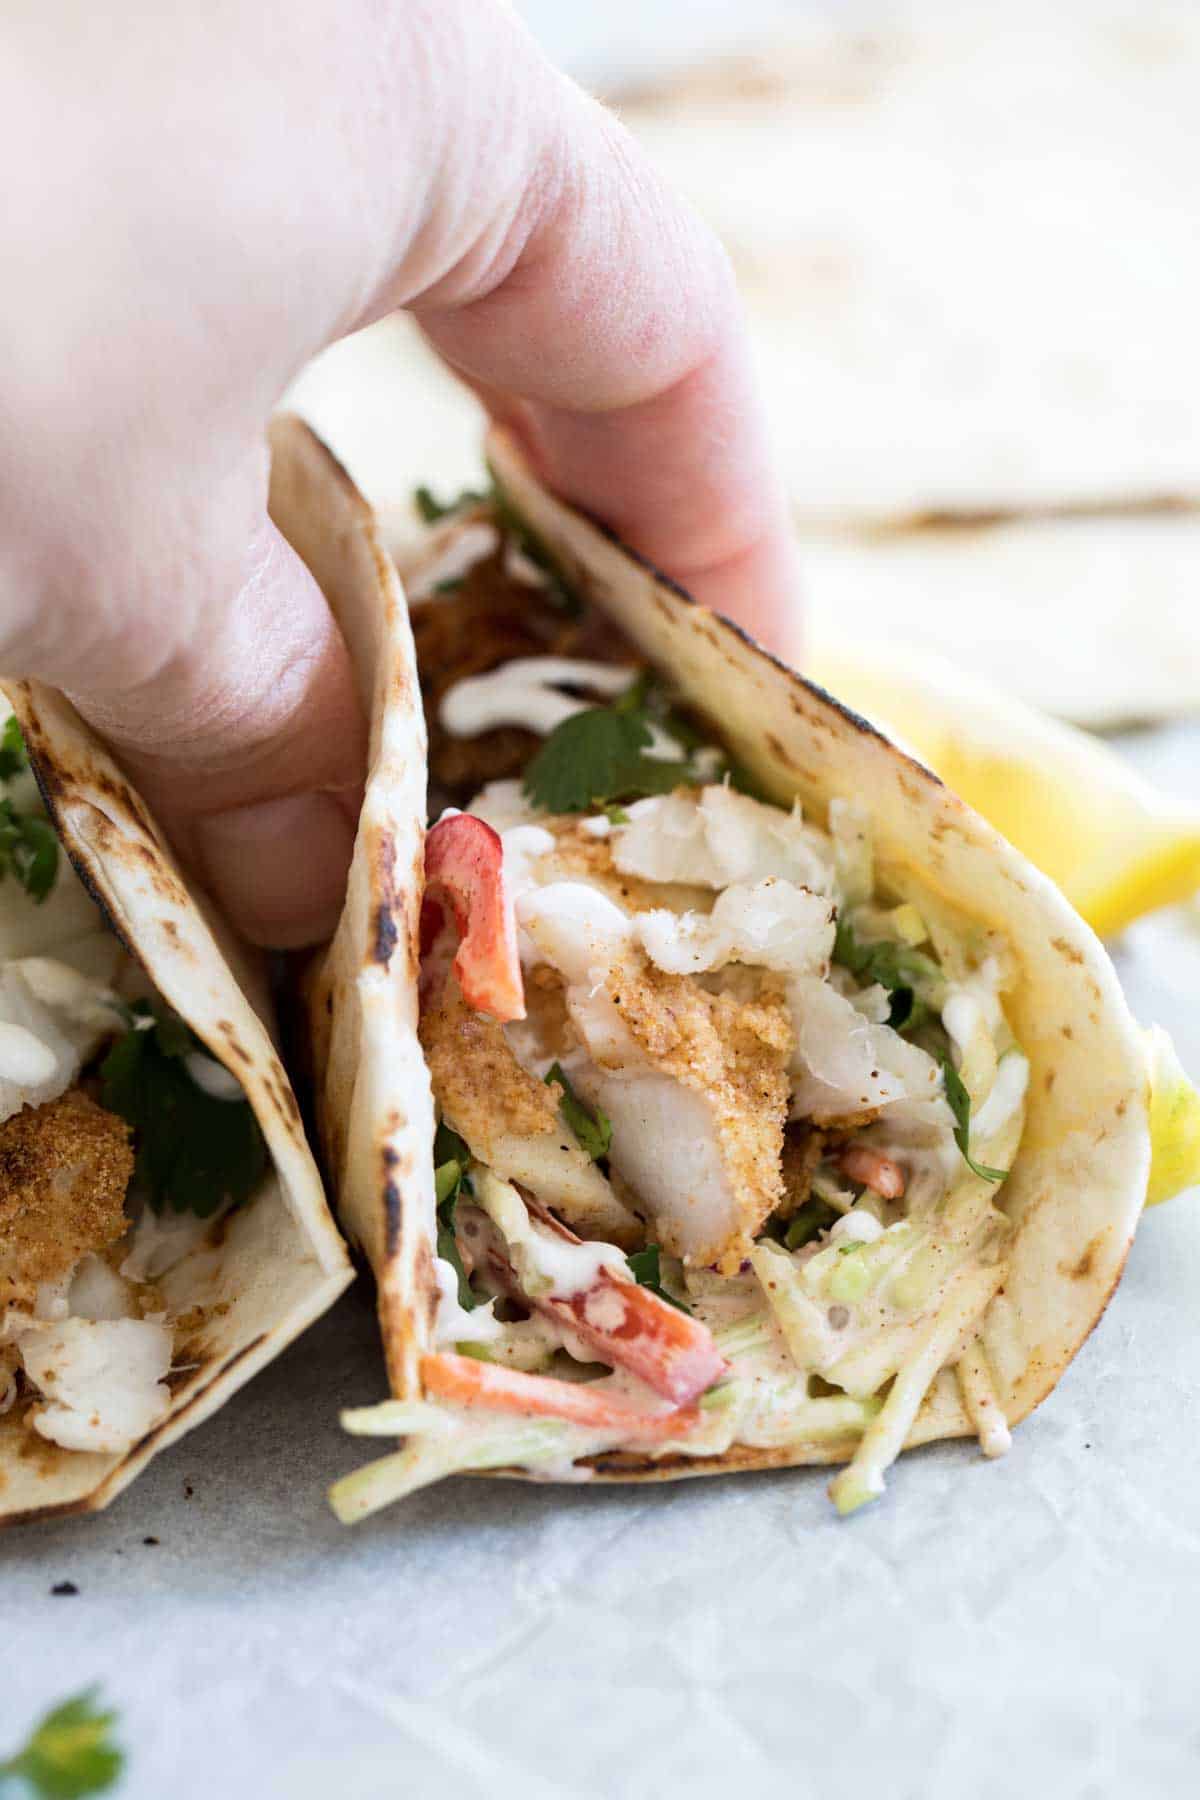 Easy Fish Taco Recipe with slaw and lime sour cream.